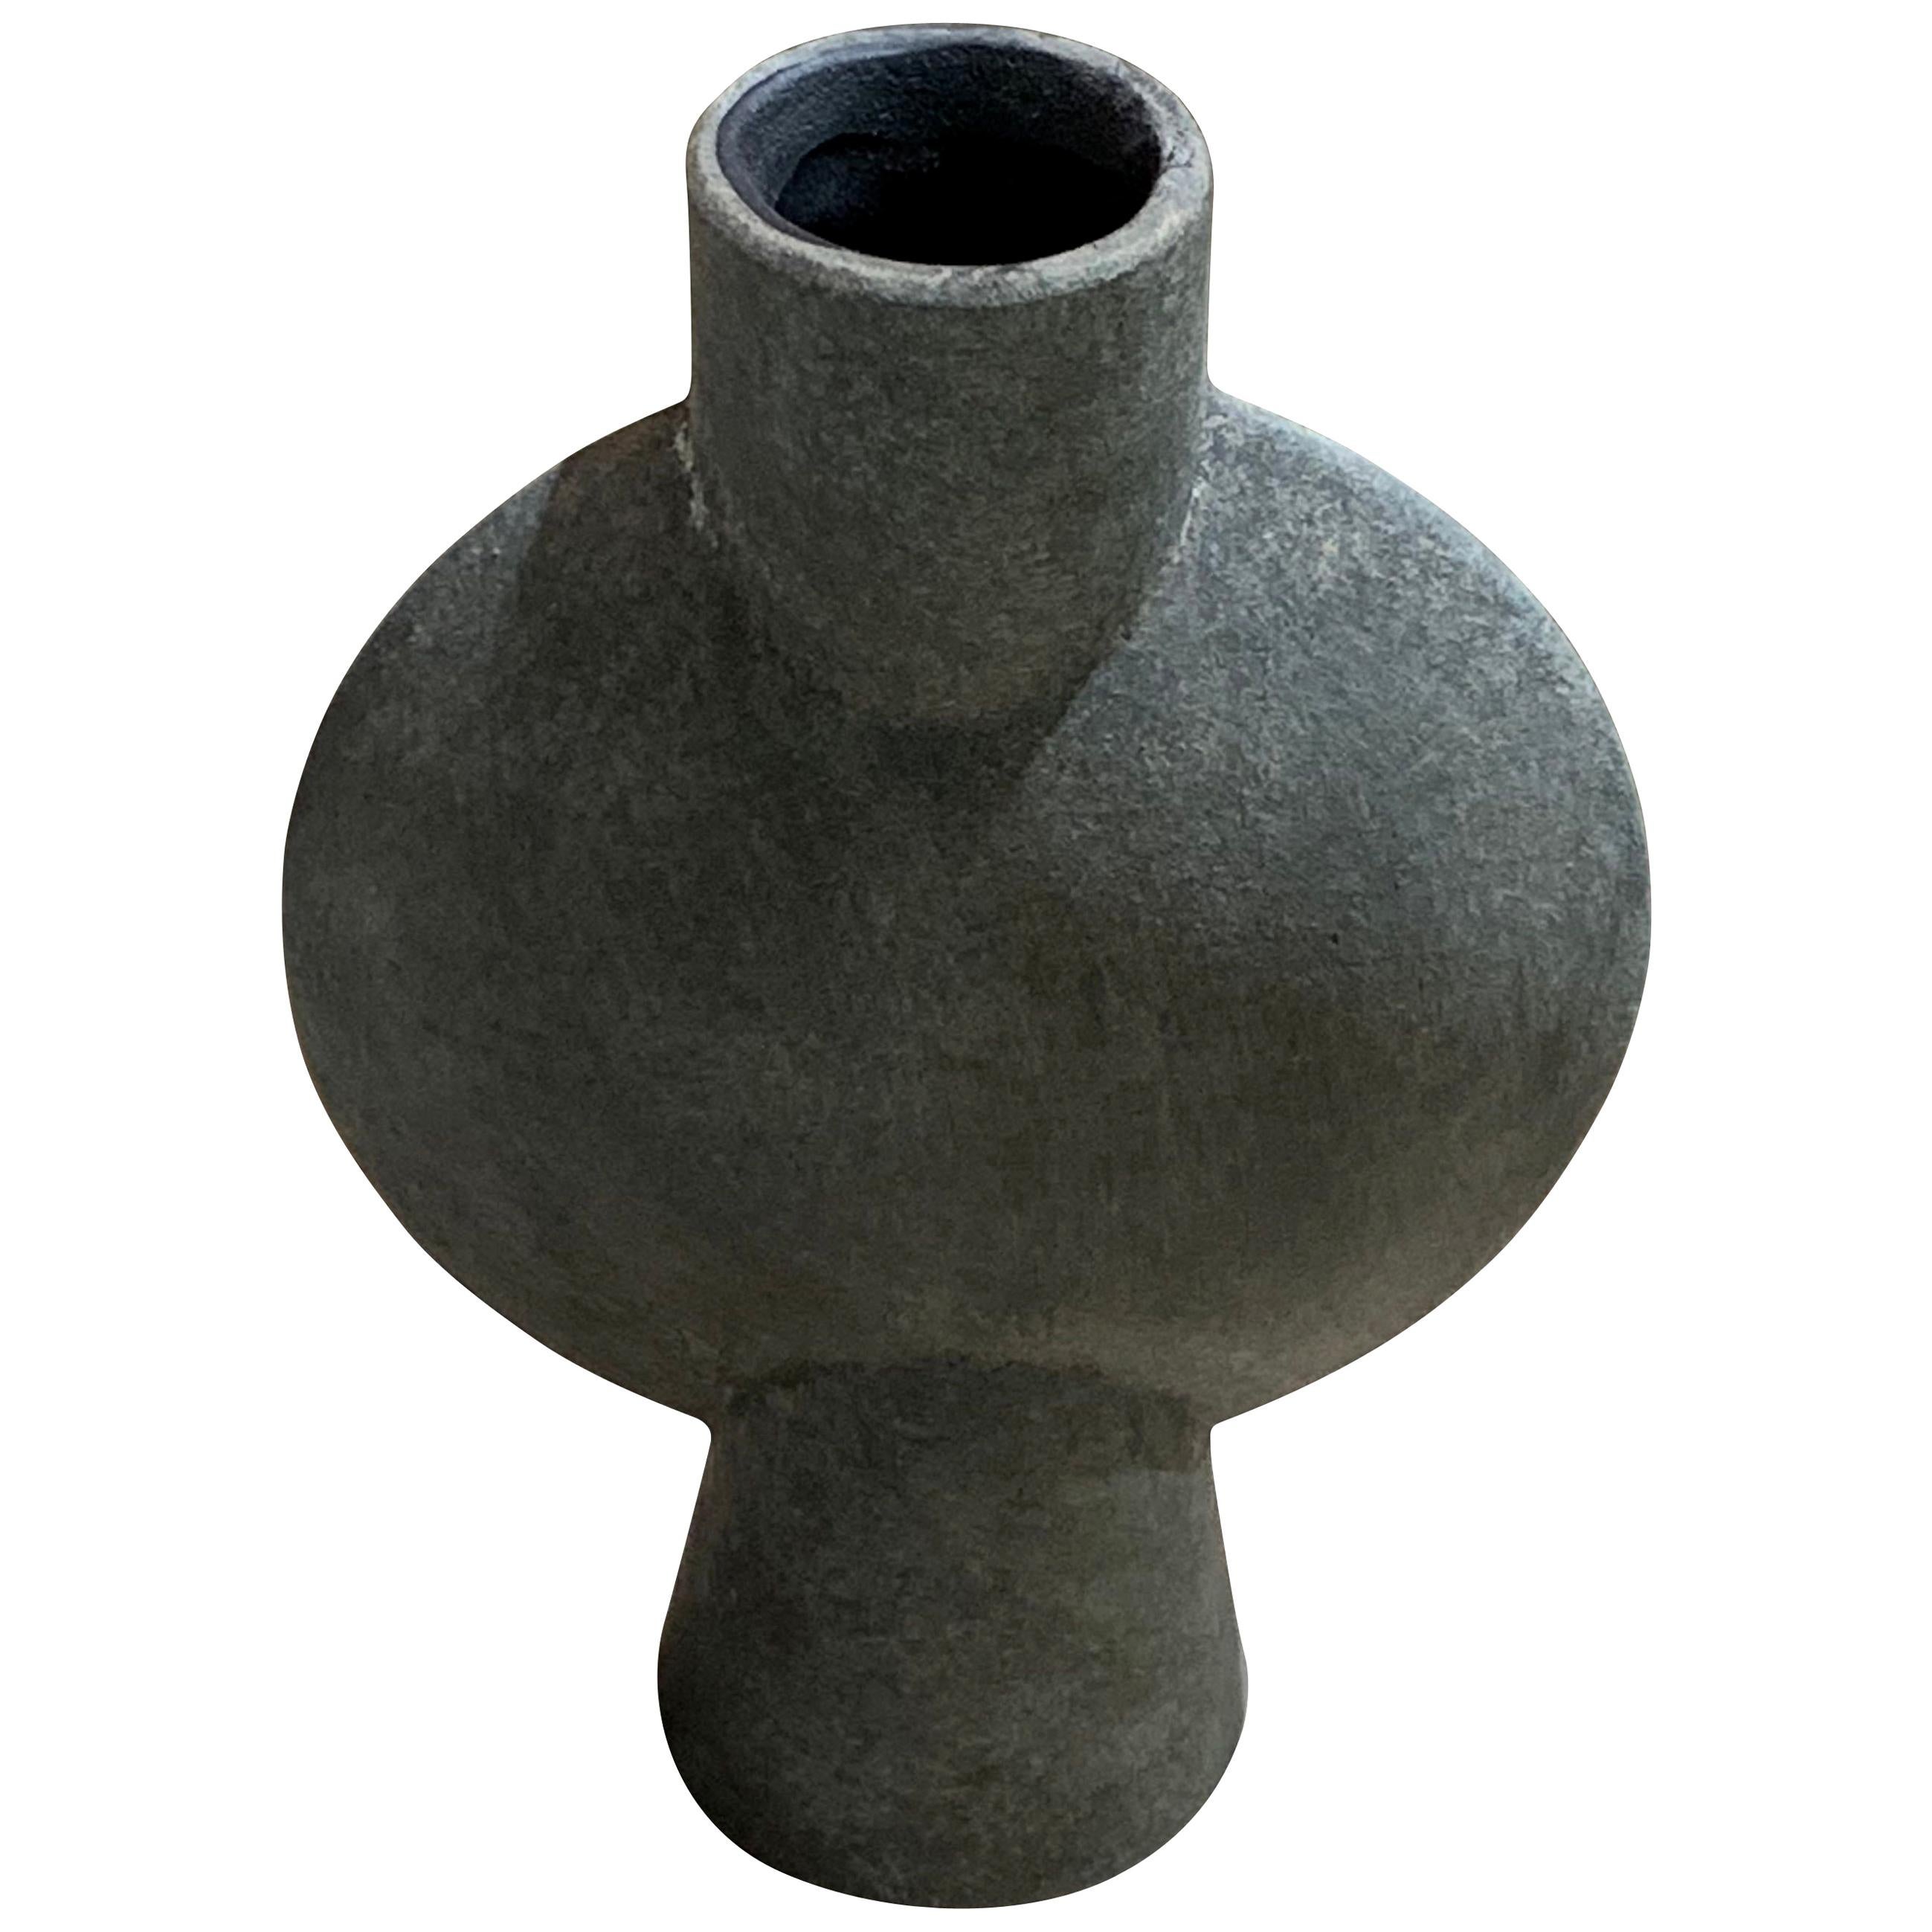 Contemporary Danish design tall matte grey bubble shaped ceramic vase.
Single tubular spout and base.
Two available and sold individually.

